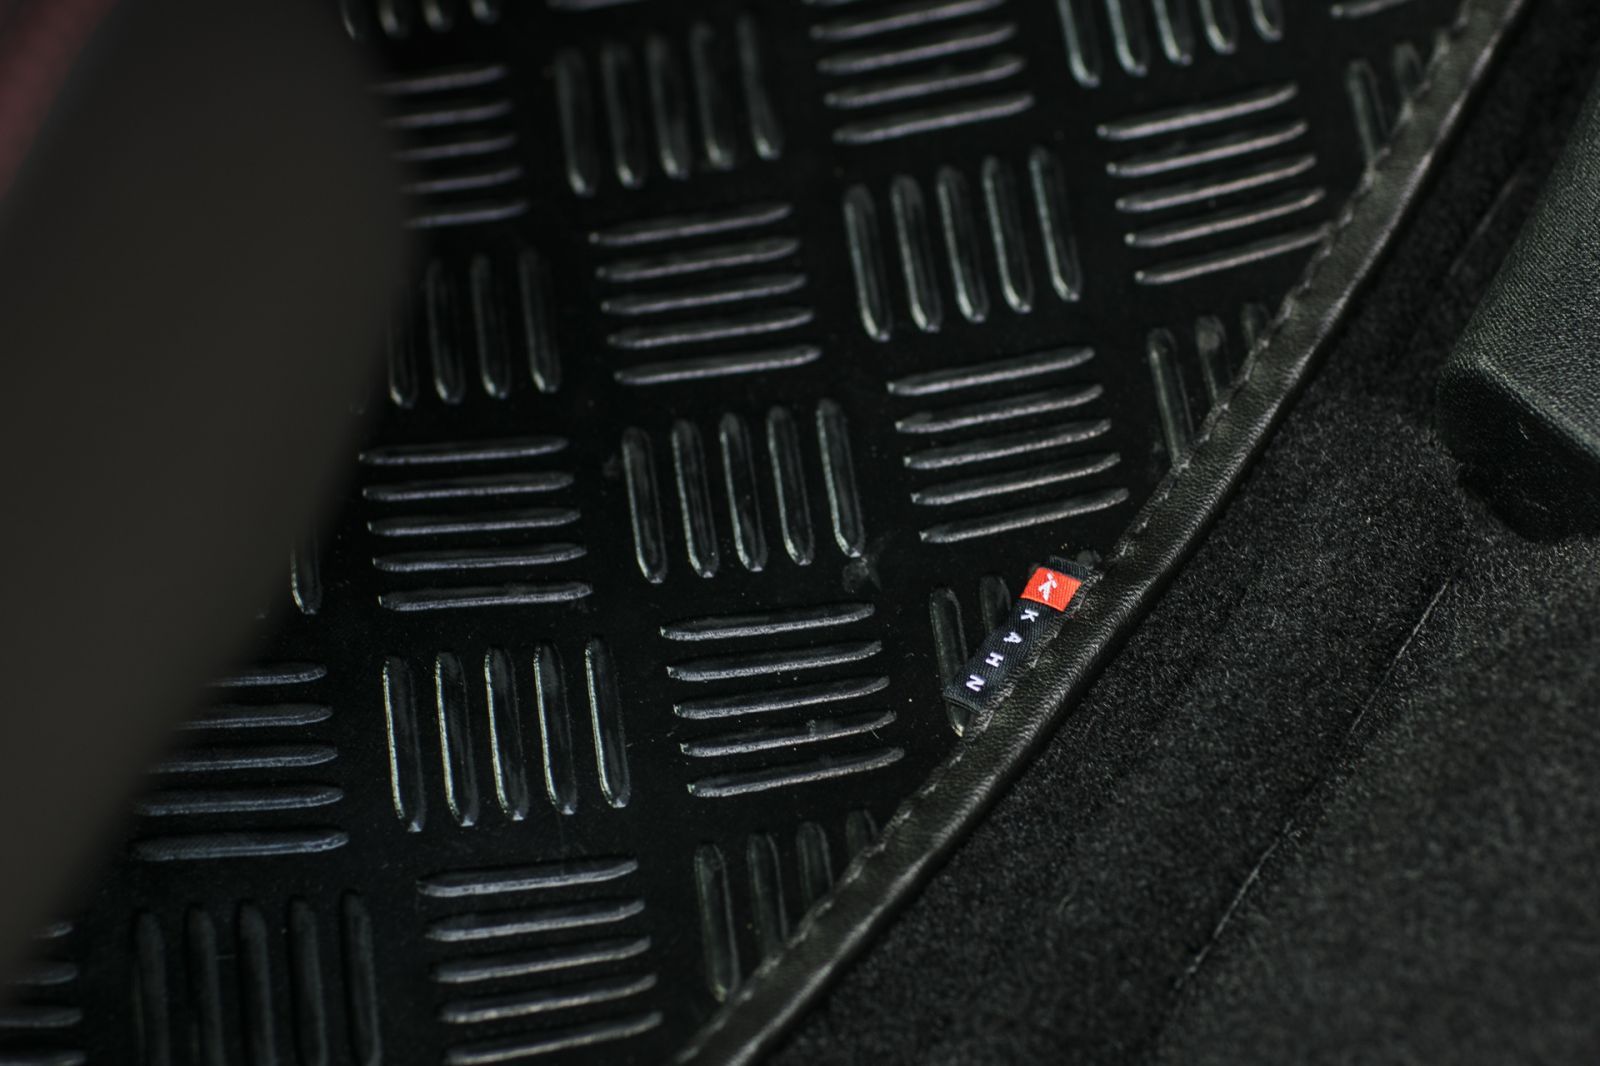 Jeep Wrangler Jk (2007-2018) Chequered Rubber Mats - 4 Door by Chelsea Truck Company - Image 2191